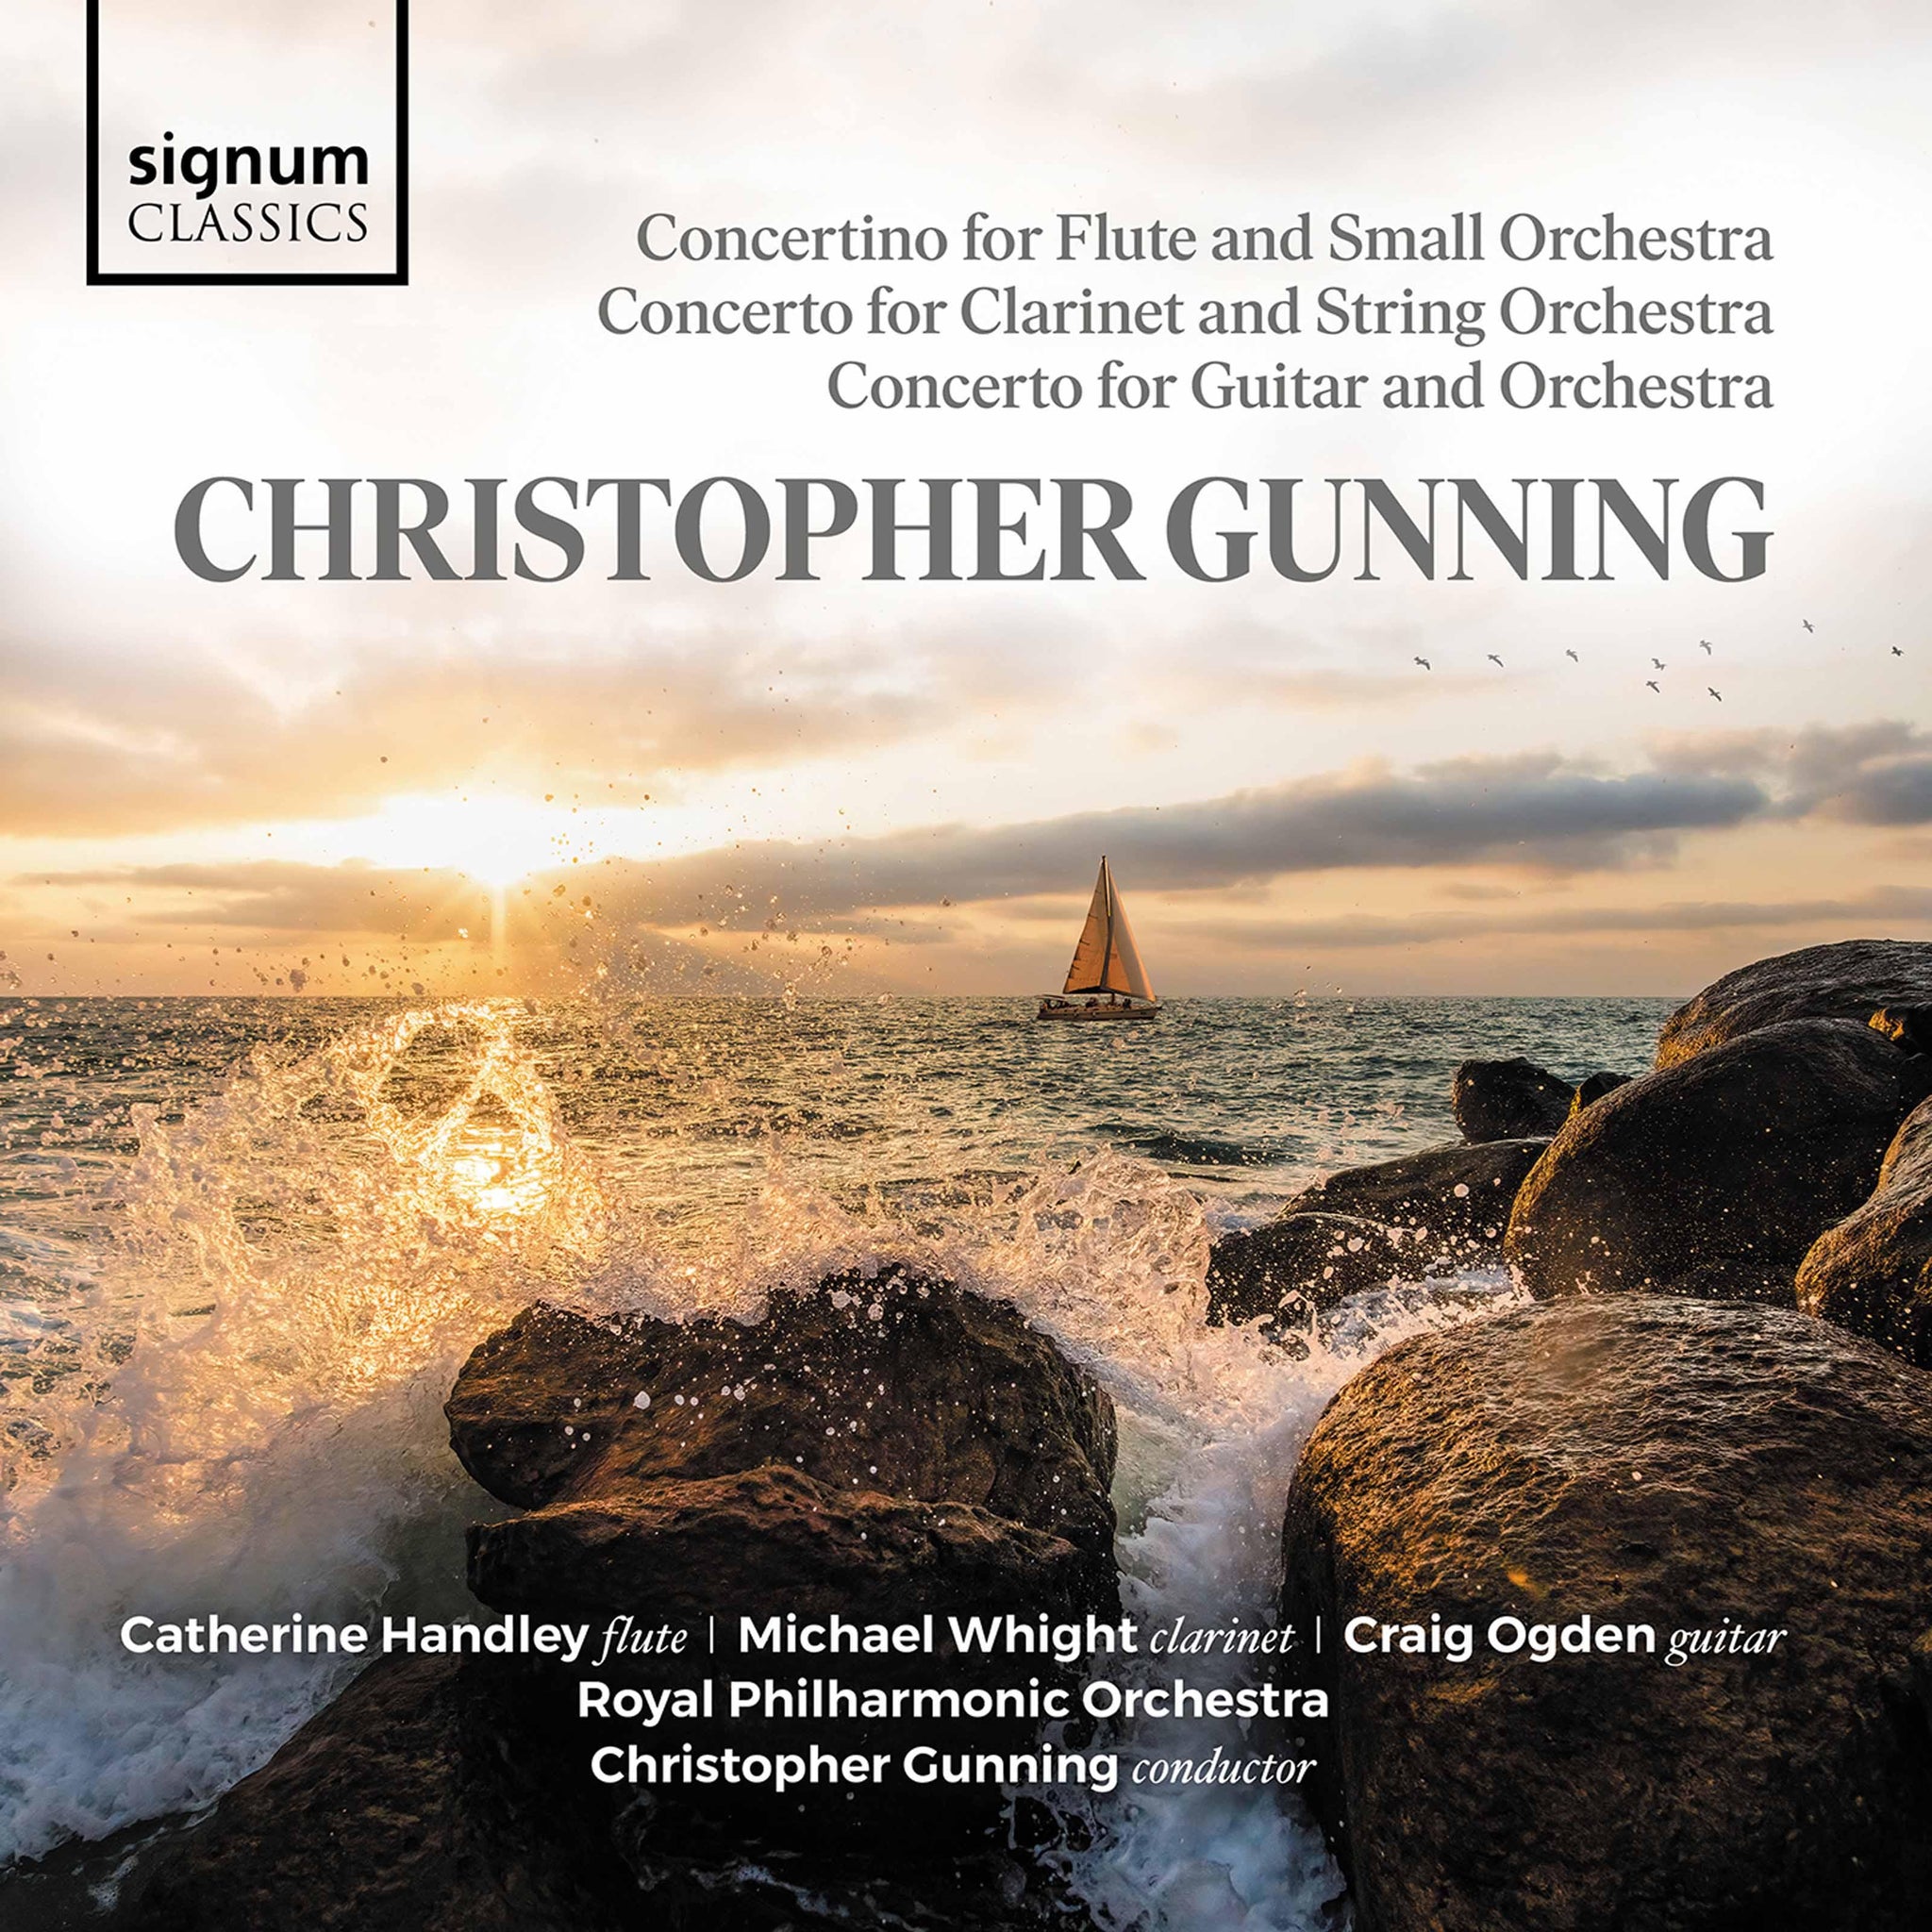 Gunning: Concerto for Guitar and Orchestra / Gunning, Royal Philharmonic Orchestra - ArkivMusic